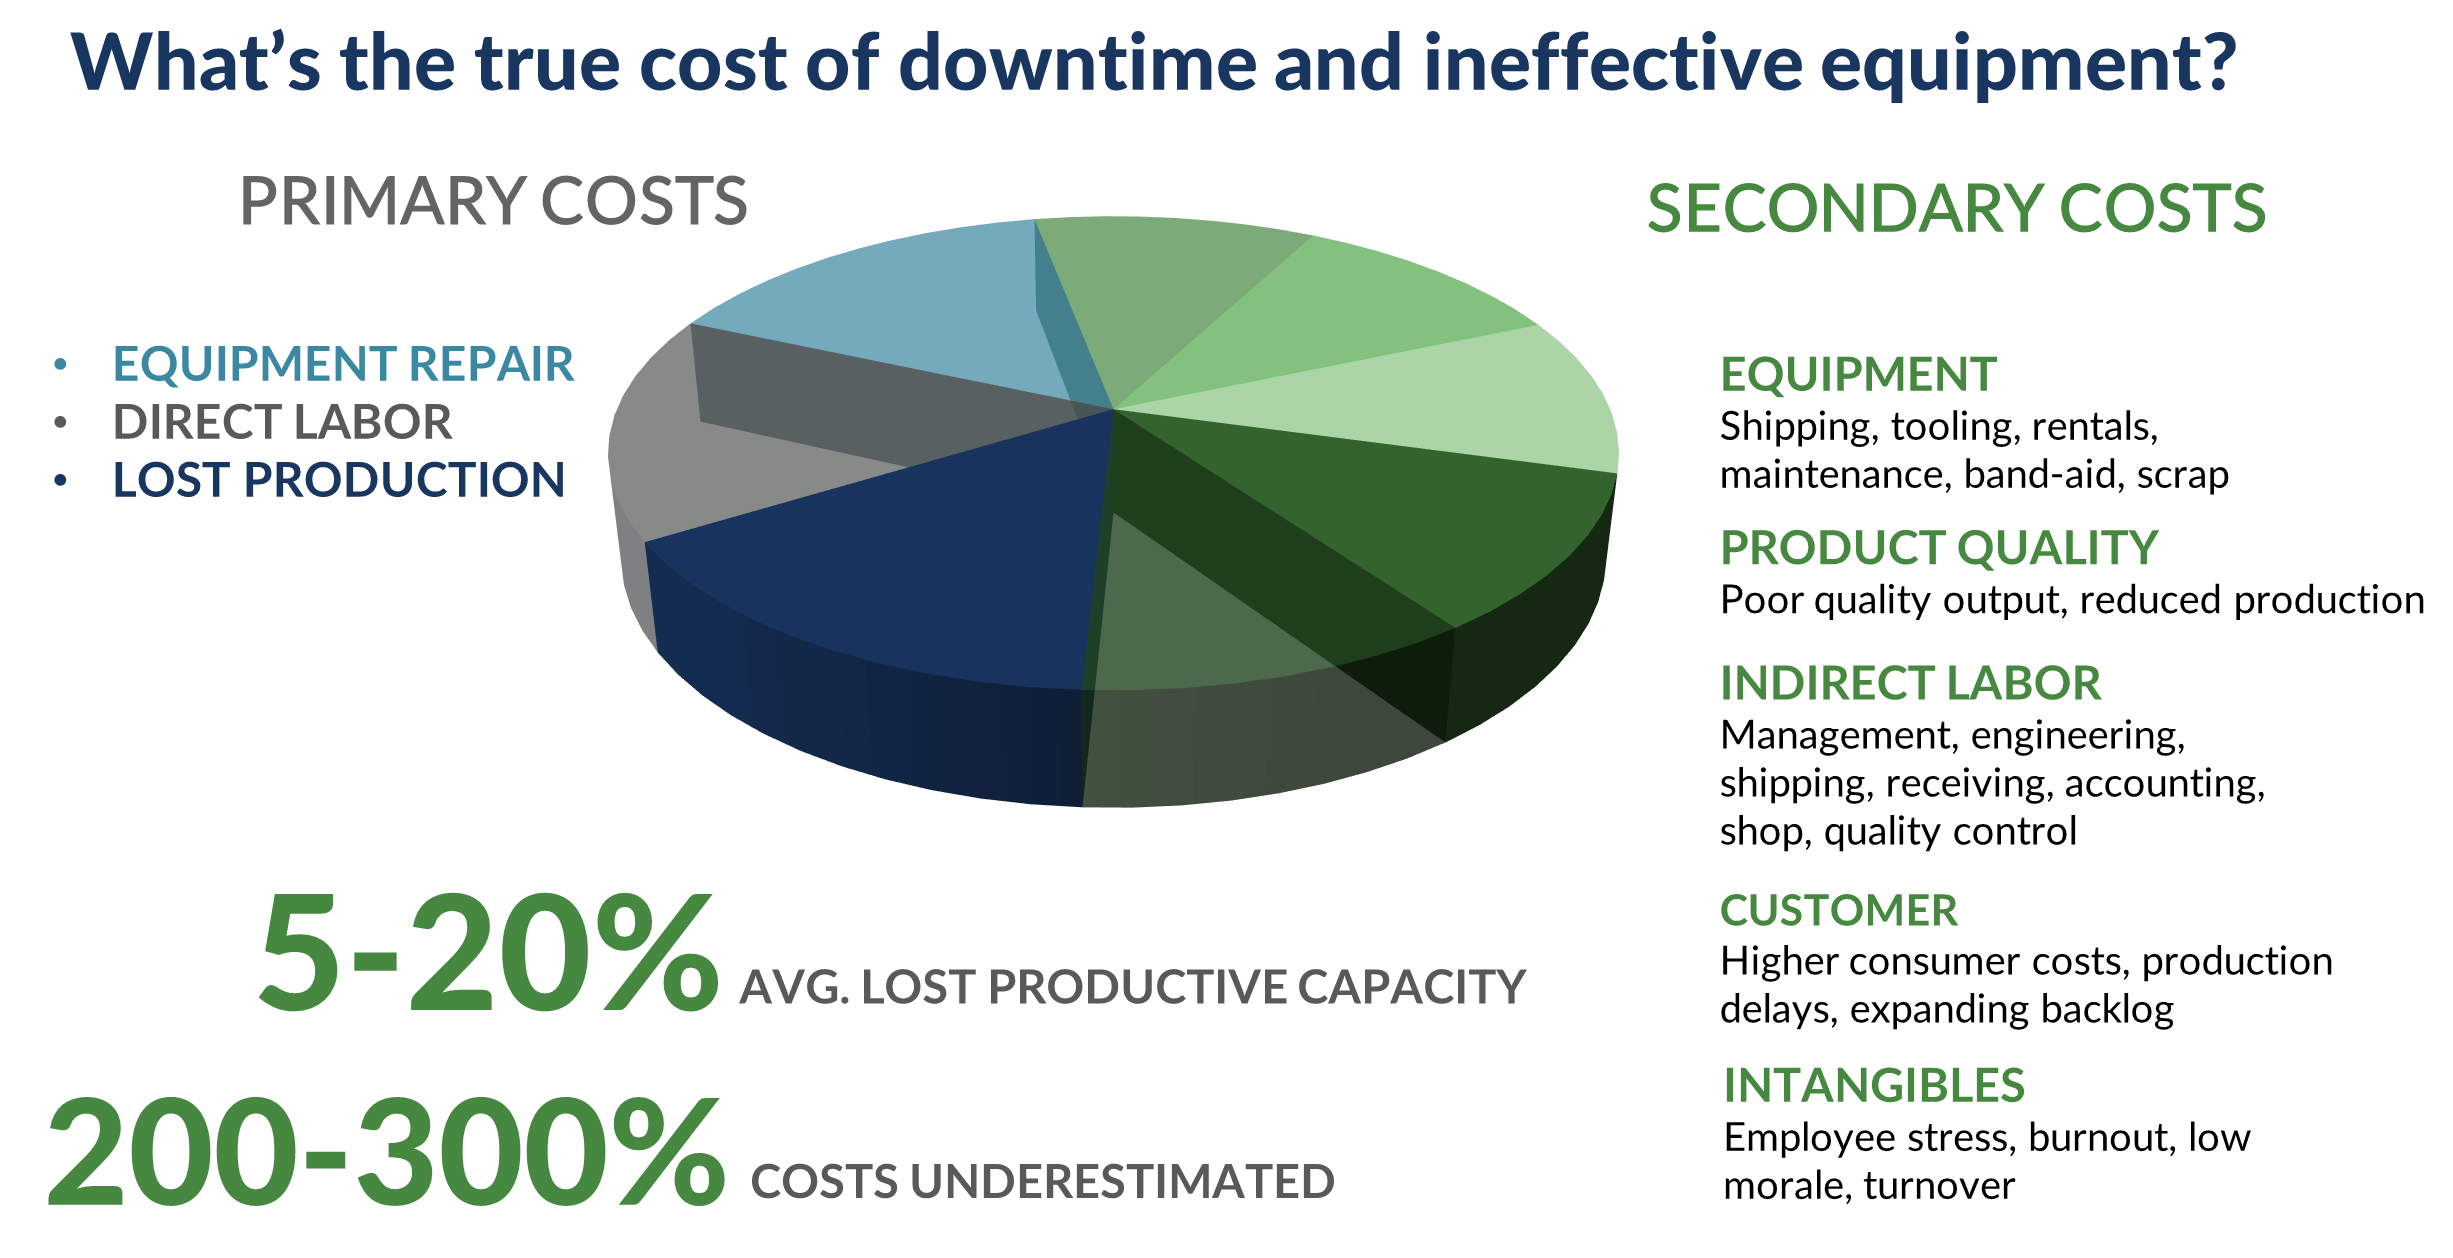 What is the true cost of downtime and ineffective equipment?